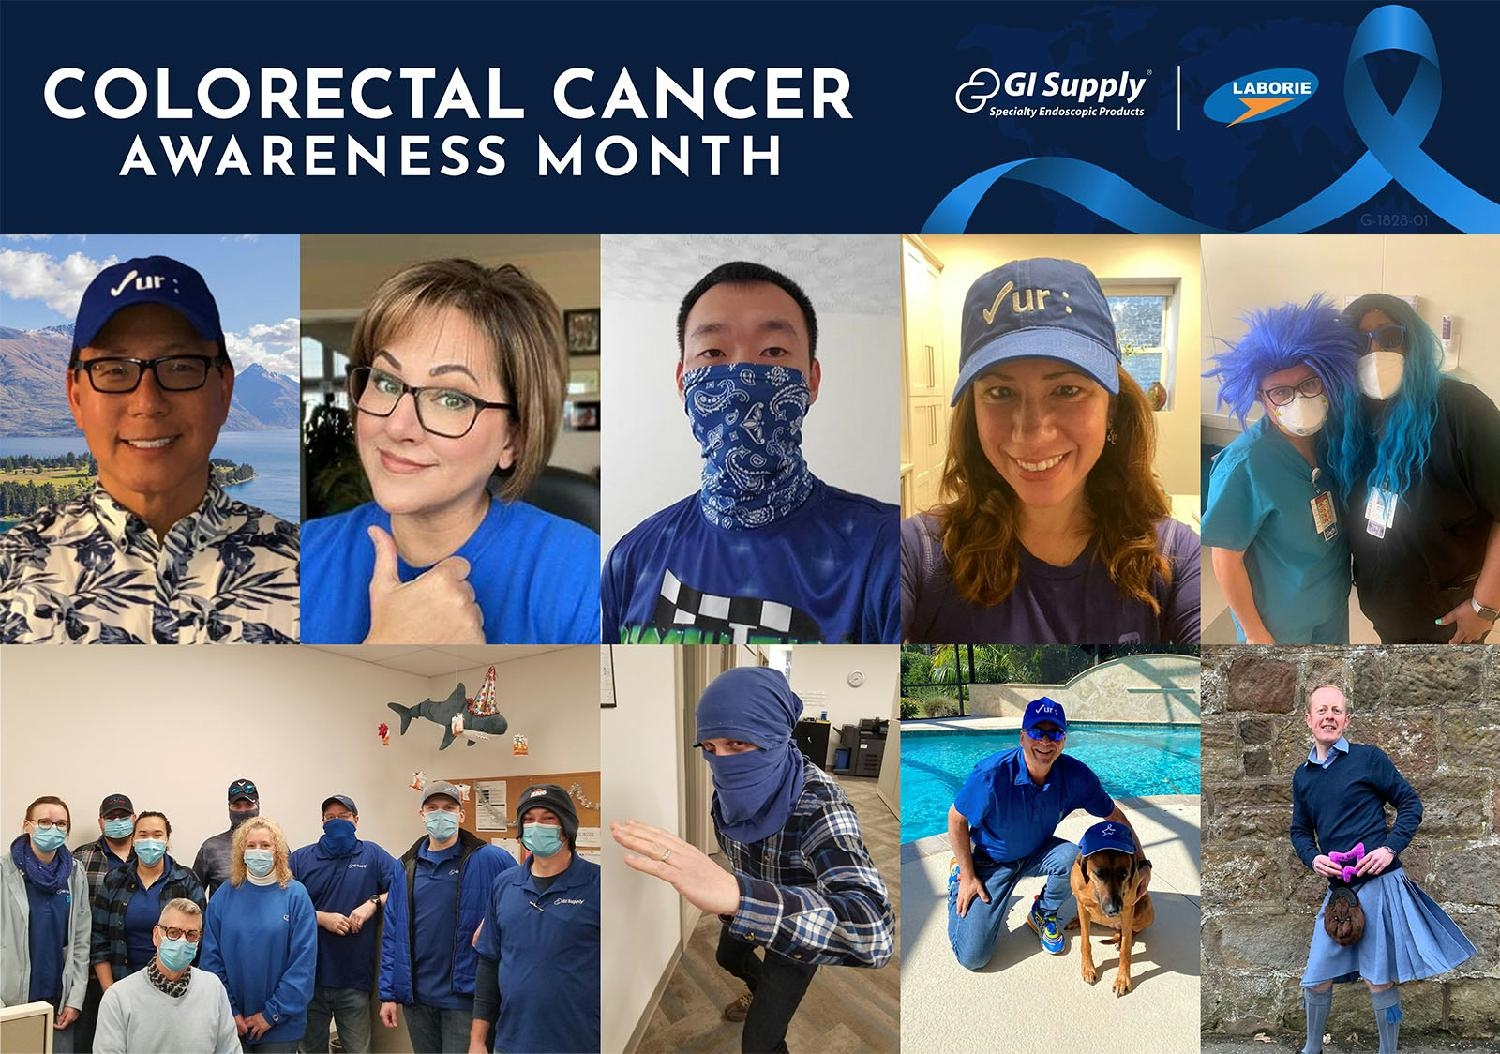 We celebrate Colorectal Cancer Awareness Month internally and externally creating awareness and providing education.